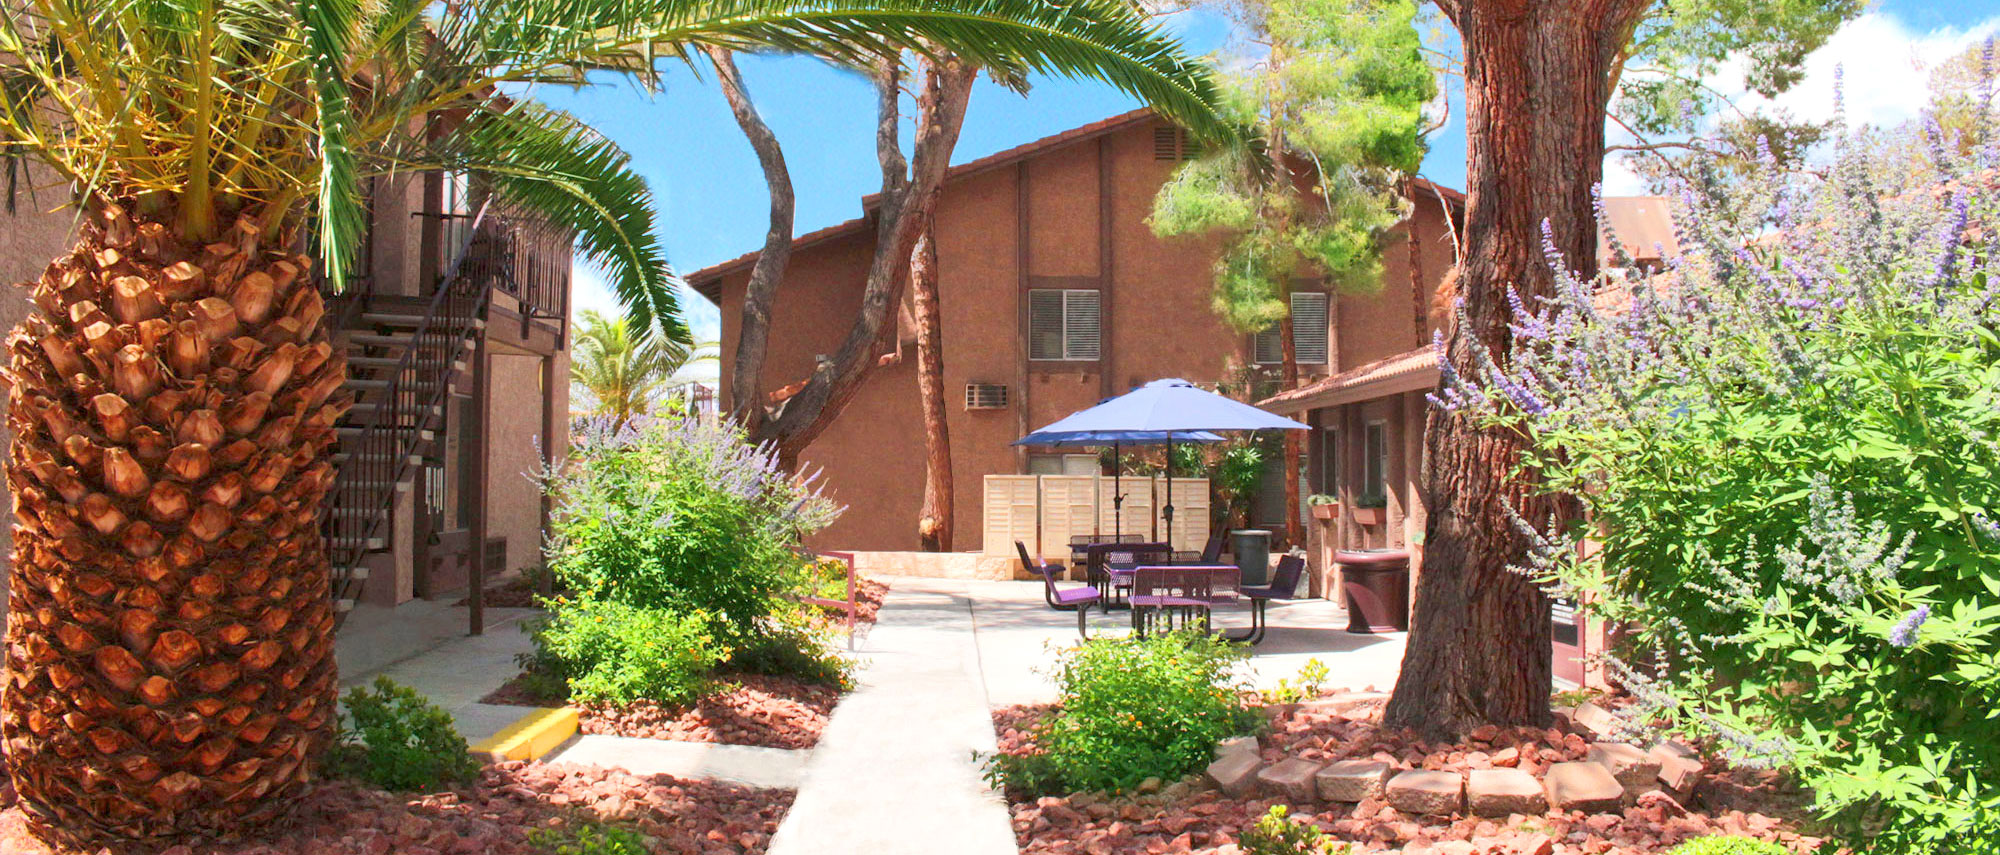 This image shows the exterior of one of the Topaz Senior Apartment units